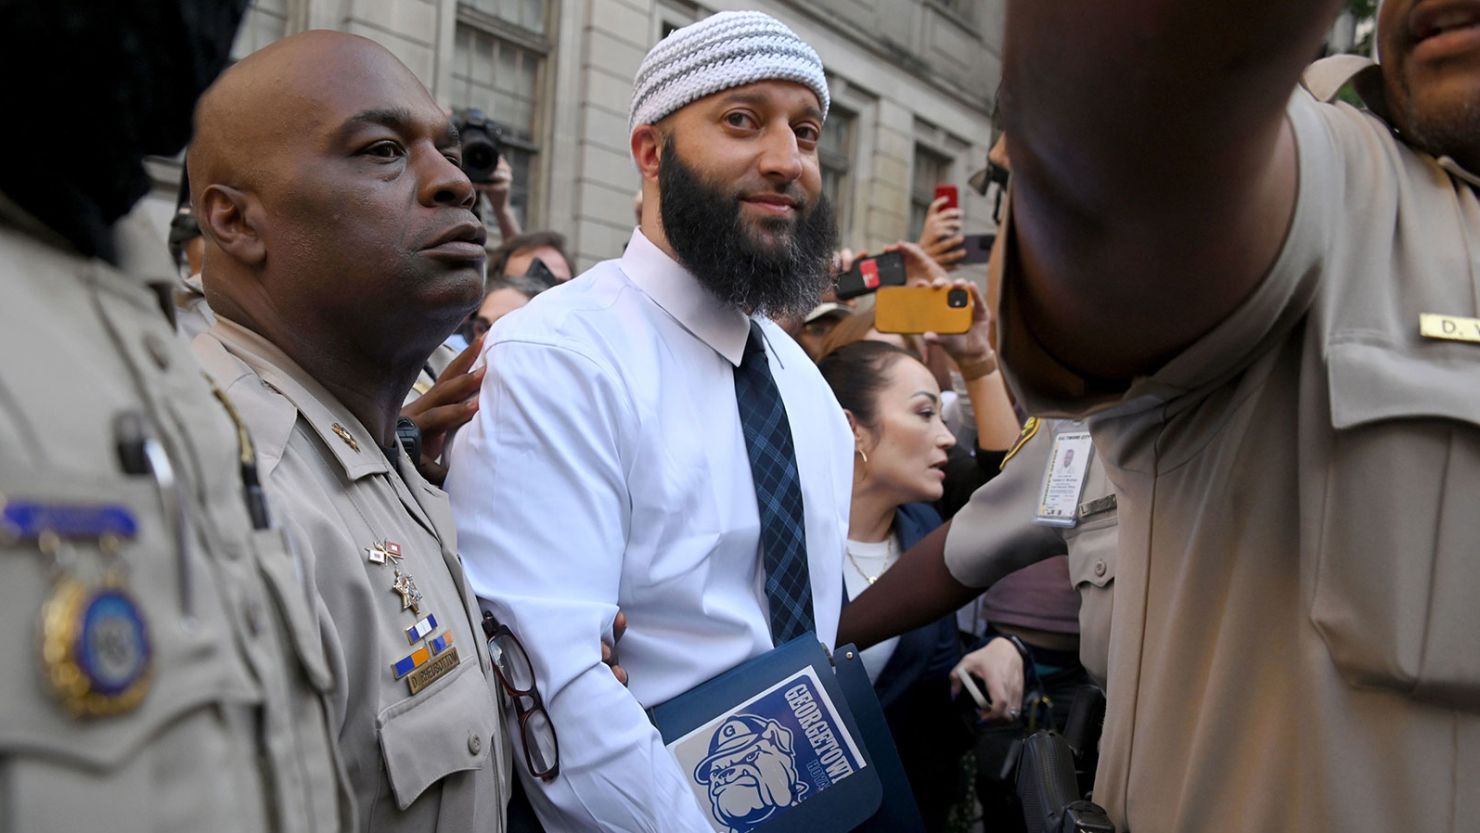 Adnan Syed's murder conviction was overturned and he was released after prosecutors raised doubts about his guilty verdict because of the revelation of alternative suspects in the homicide and unreliable evidence used against him at trial. 